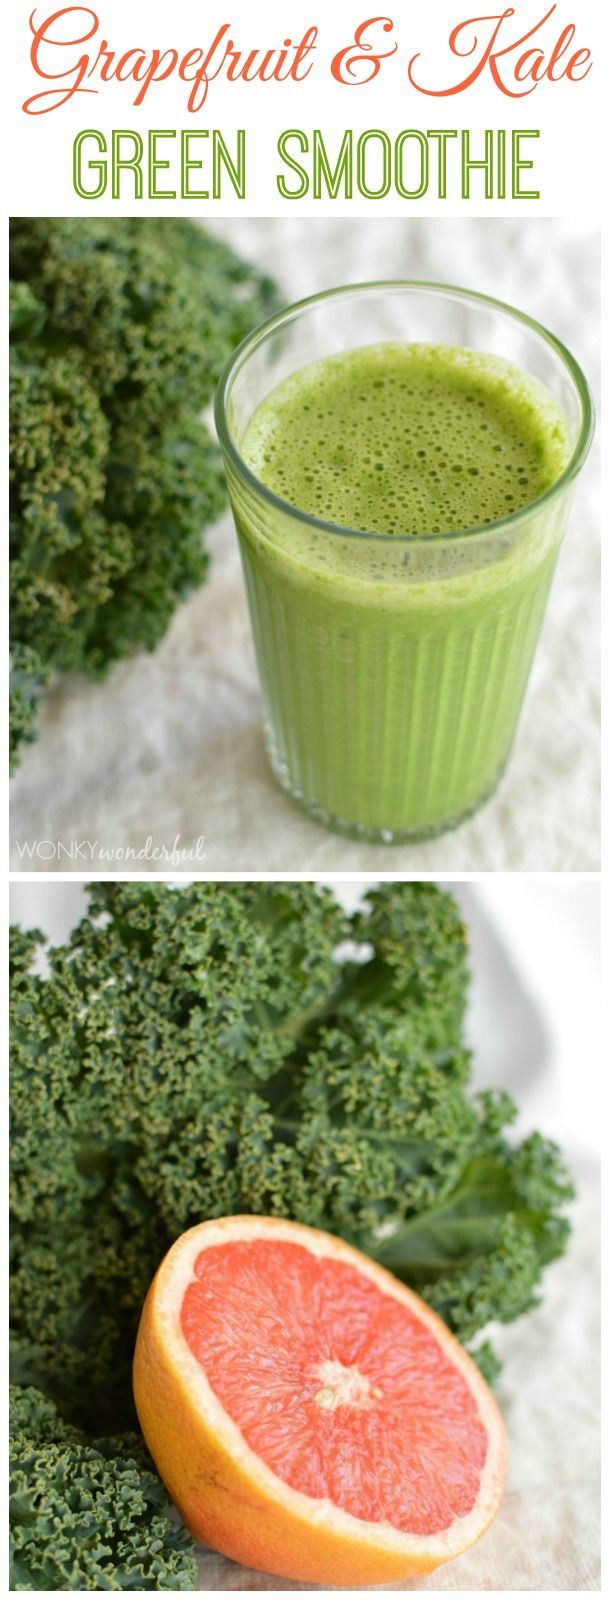 Green Smoothie Recipe - Grapefruit and Kale -   9 healthy recipes Smoothies cleanses ideas